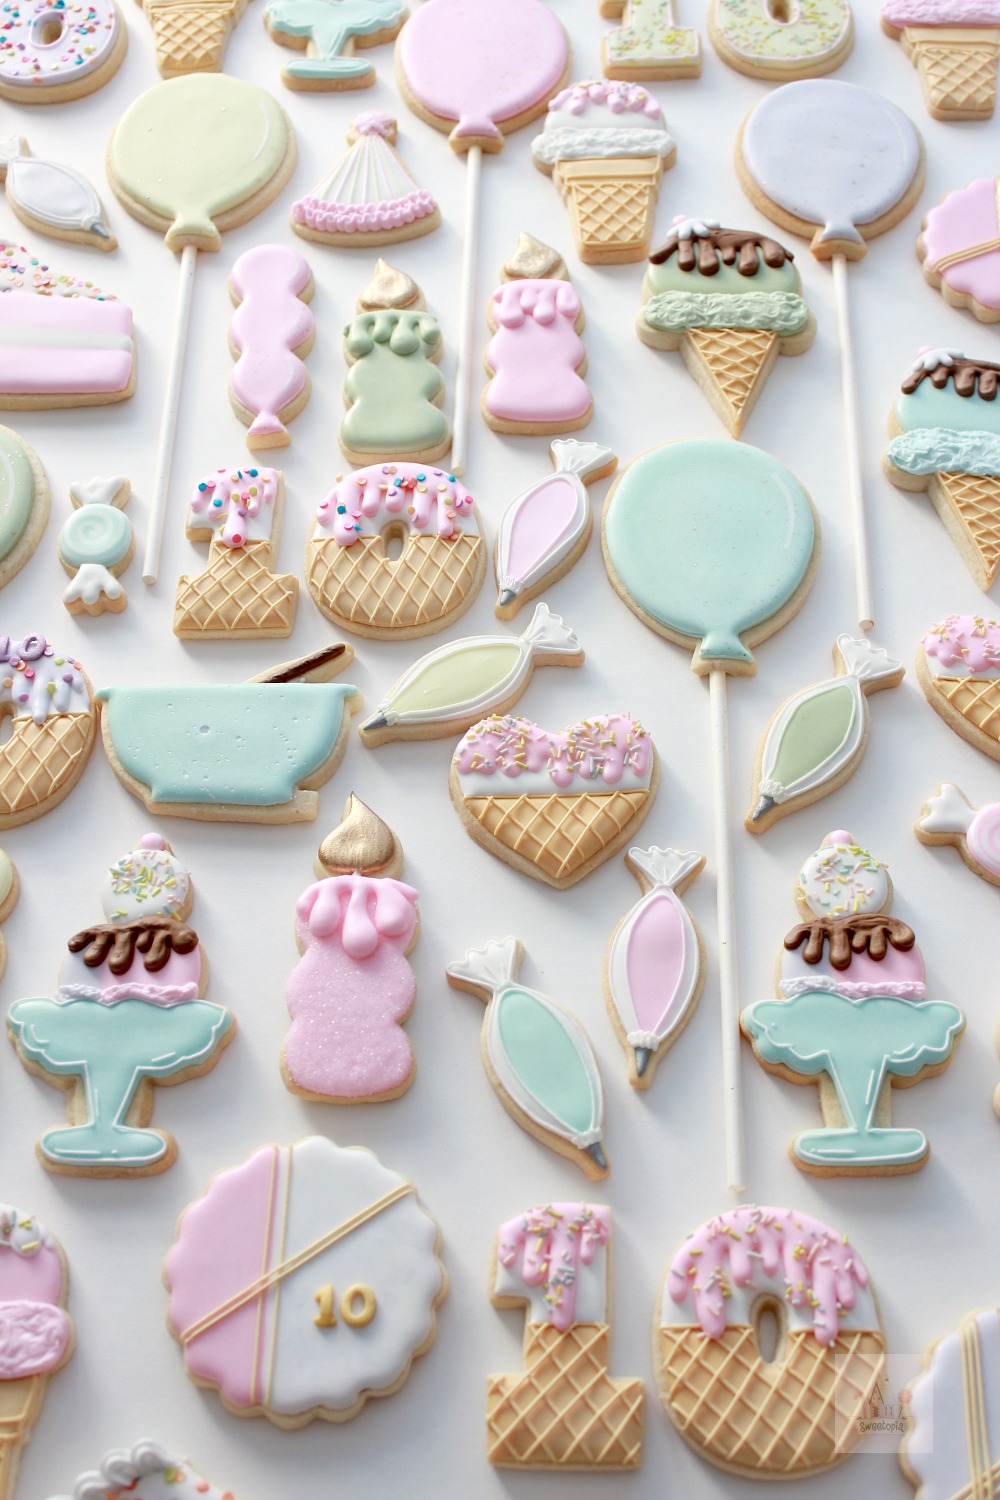 Birthday Party Decorated Cookies and Confetti Cut Out Cookie Recipe Sweetopia